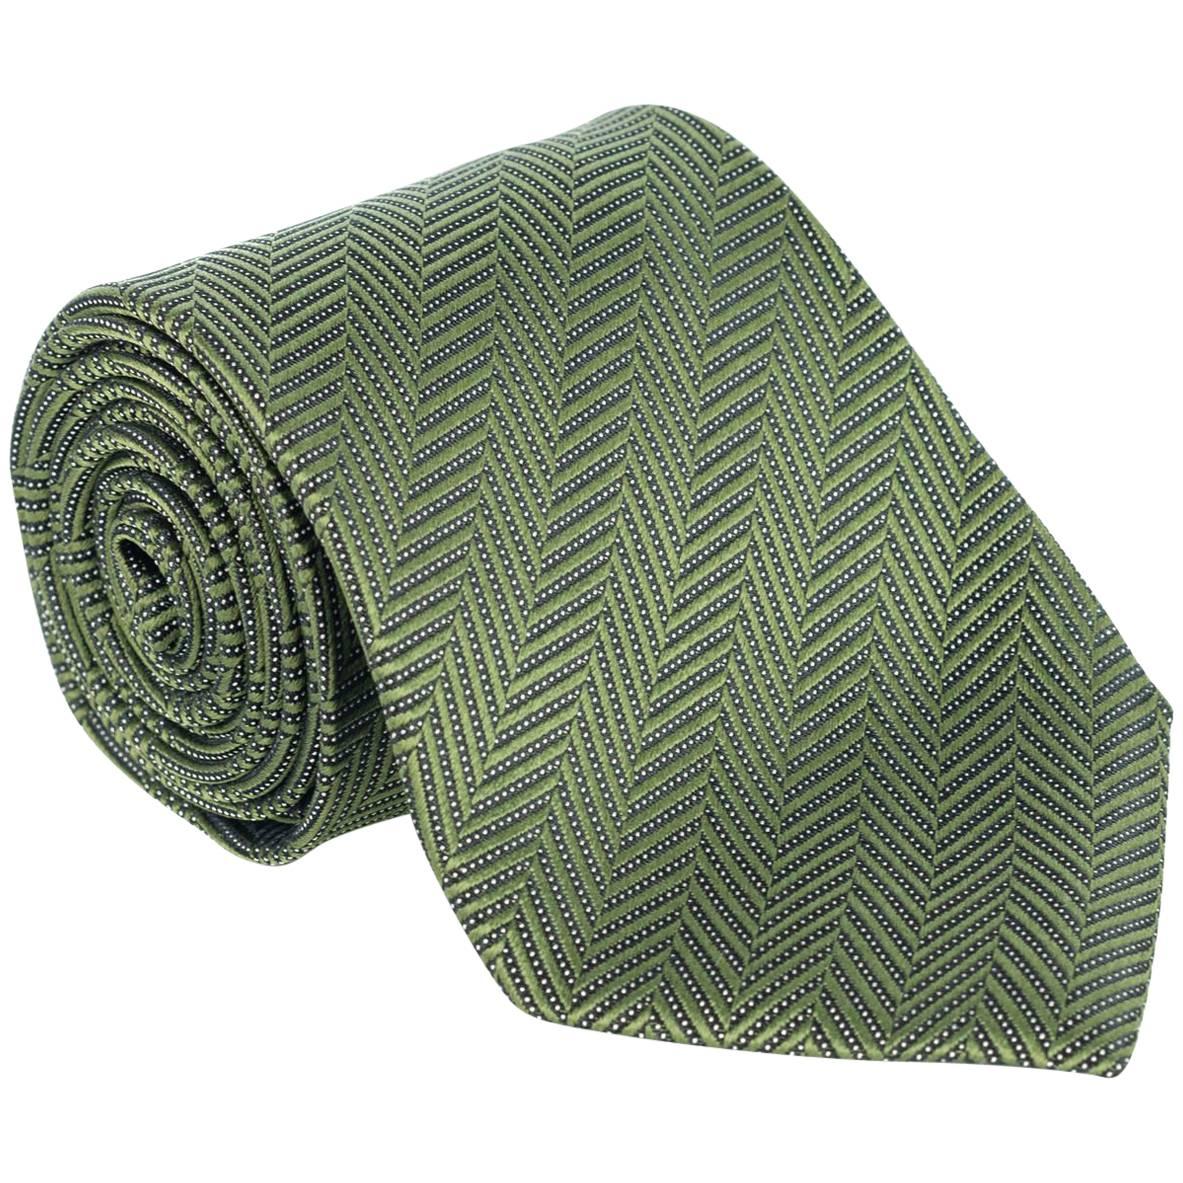 Italian luxury brand, Tom Ford, has crafted these gorgeous Knit and Silk Tie  For Sale